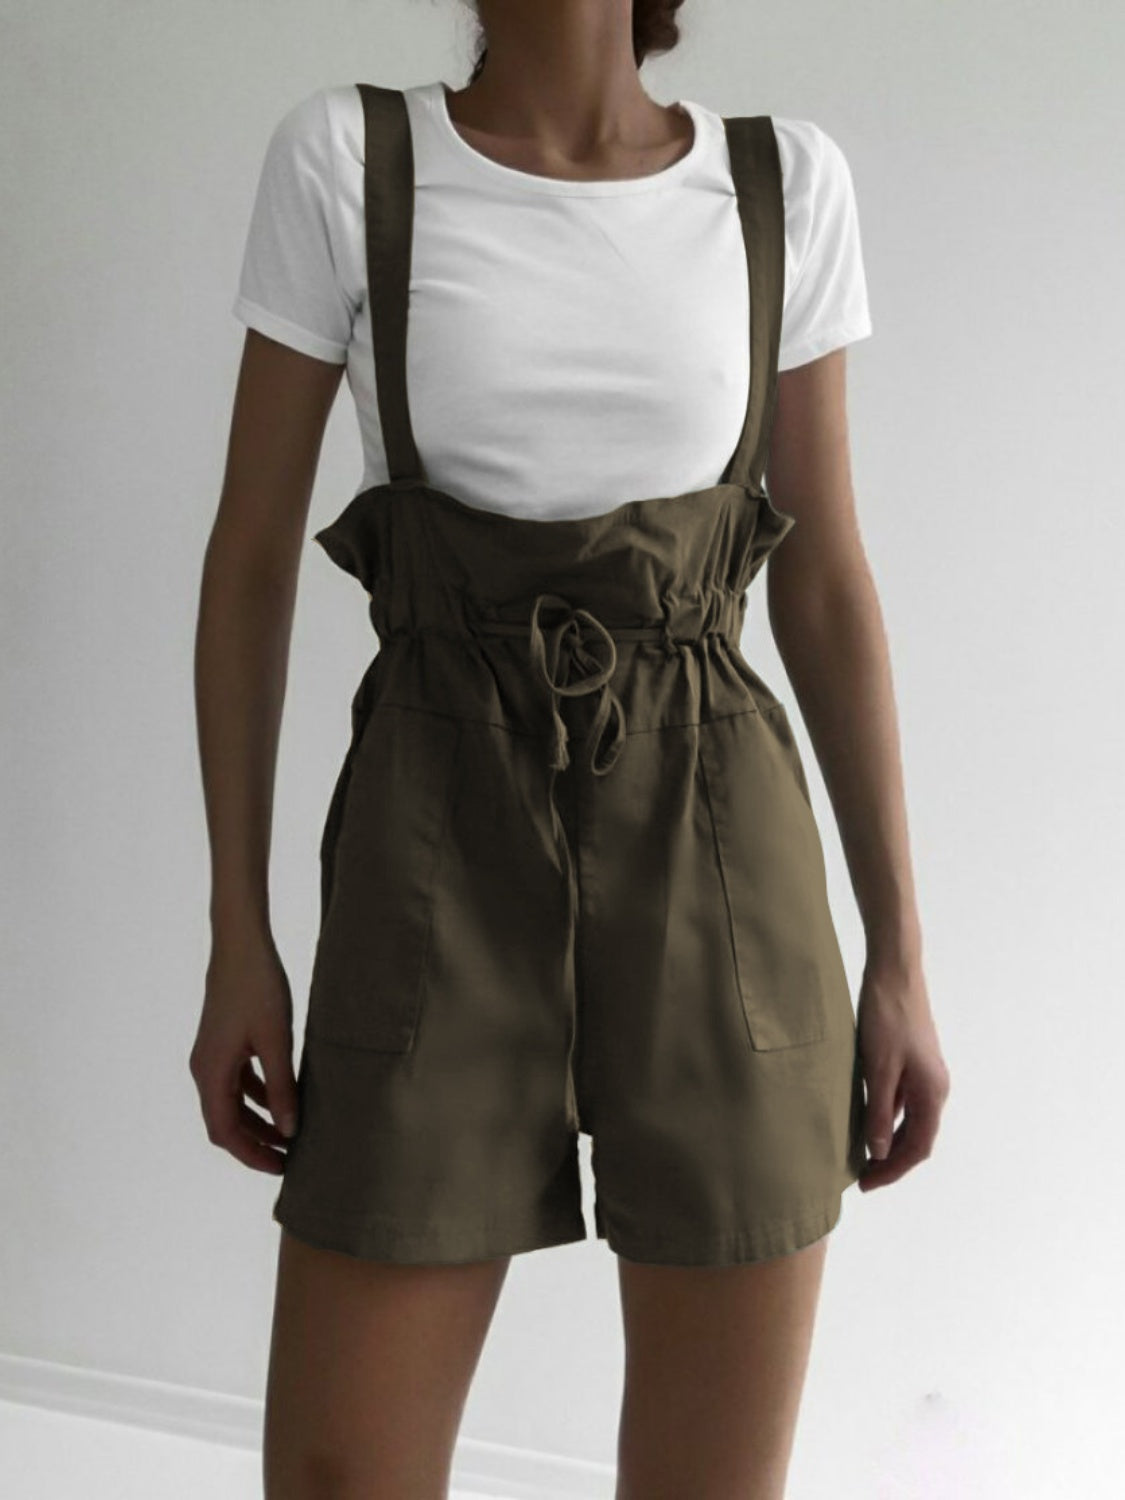 TEEK - Drawstring Pocketed Wide Strap Overalls with Pockets Romper TEEK Trend Moss S 